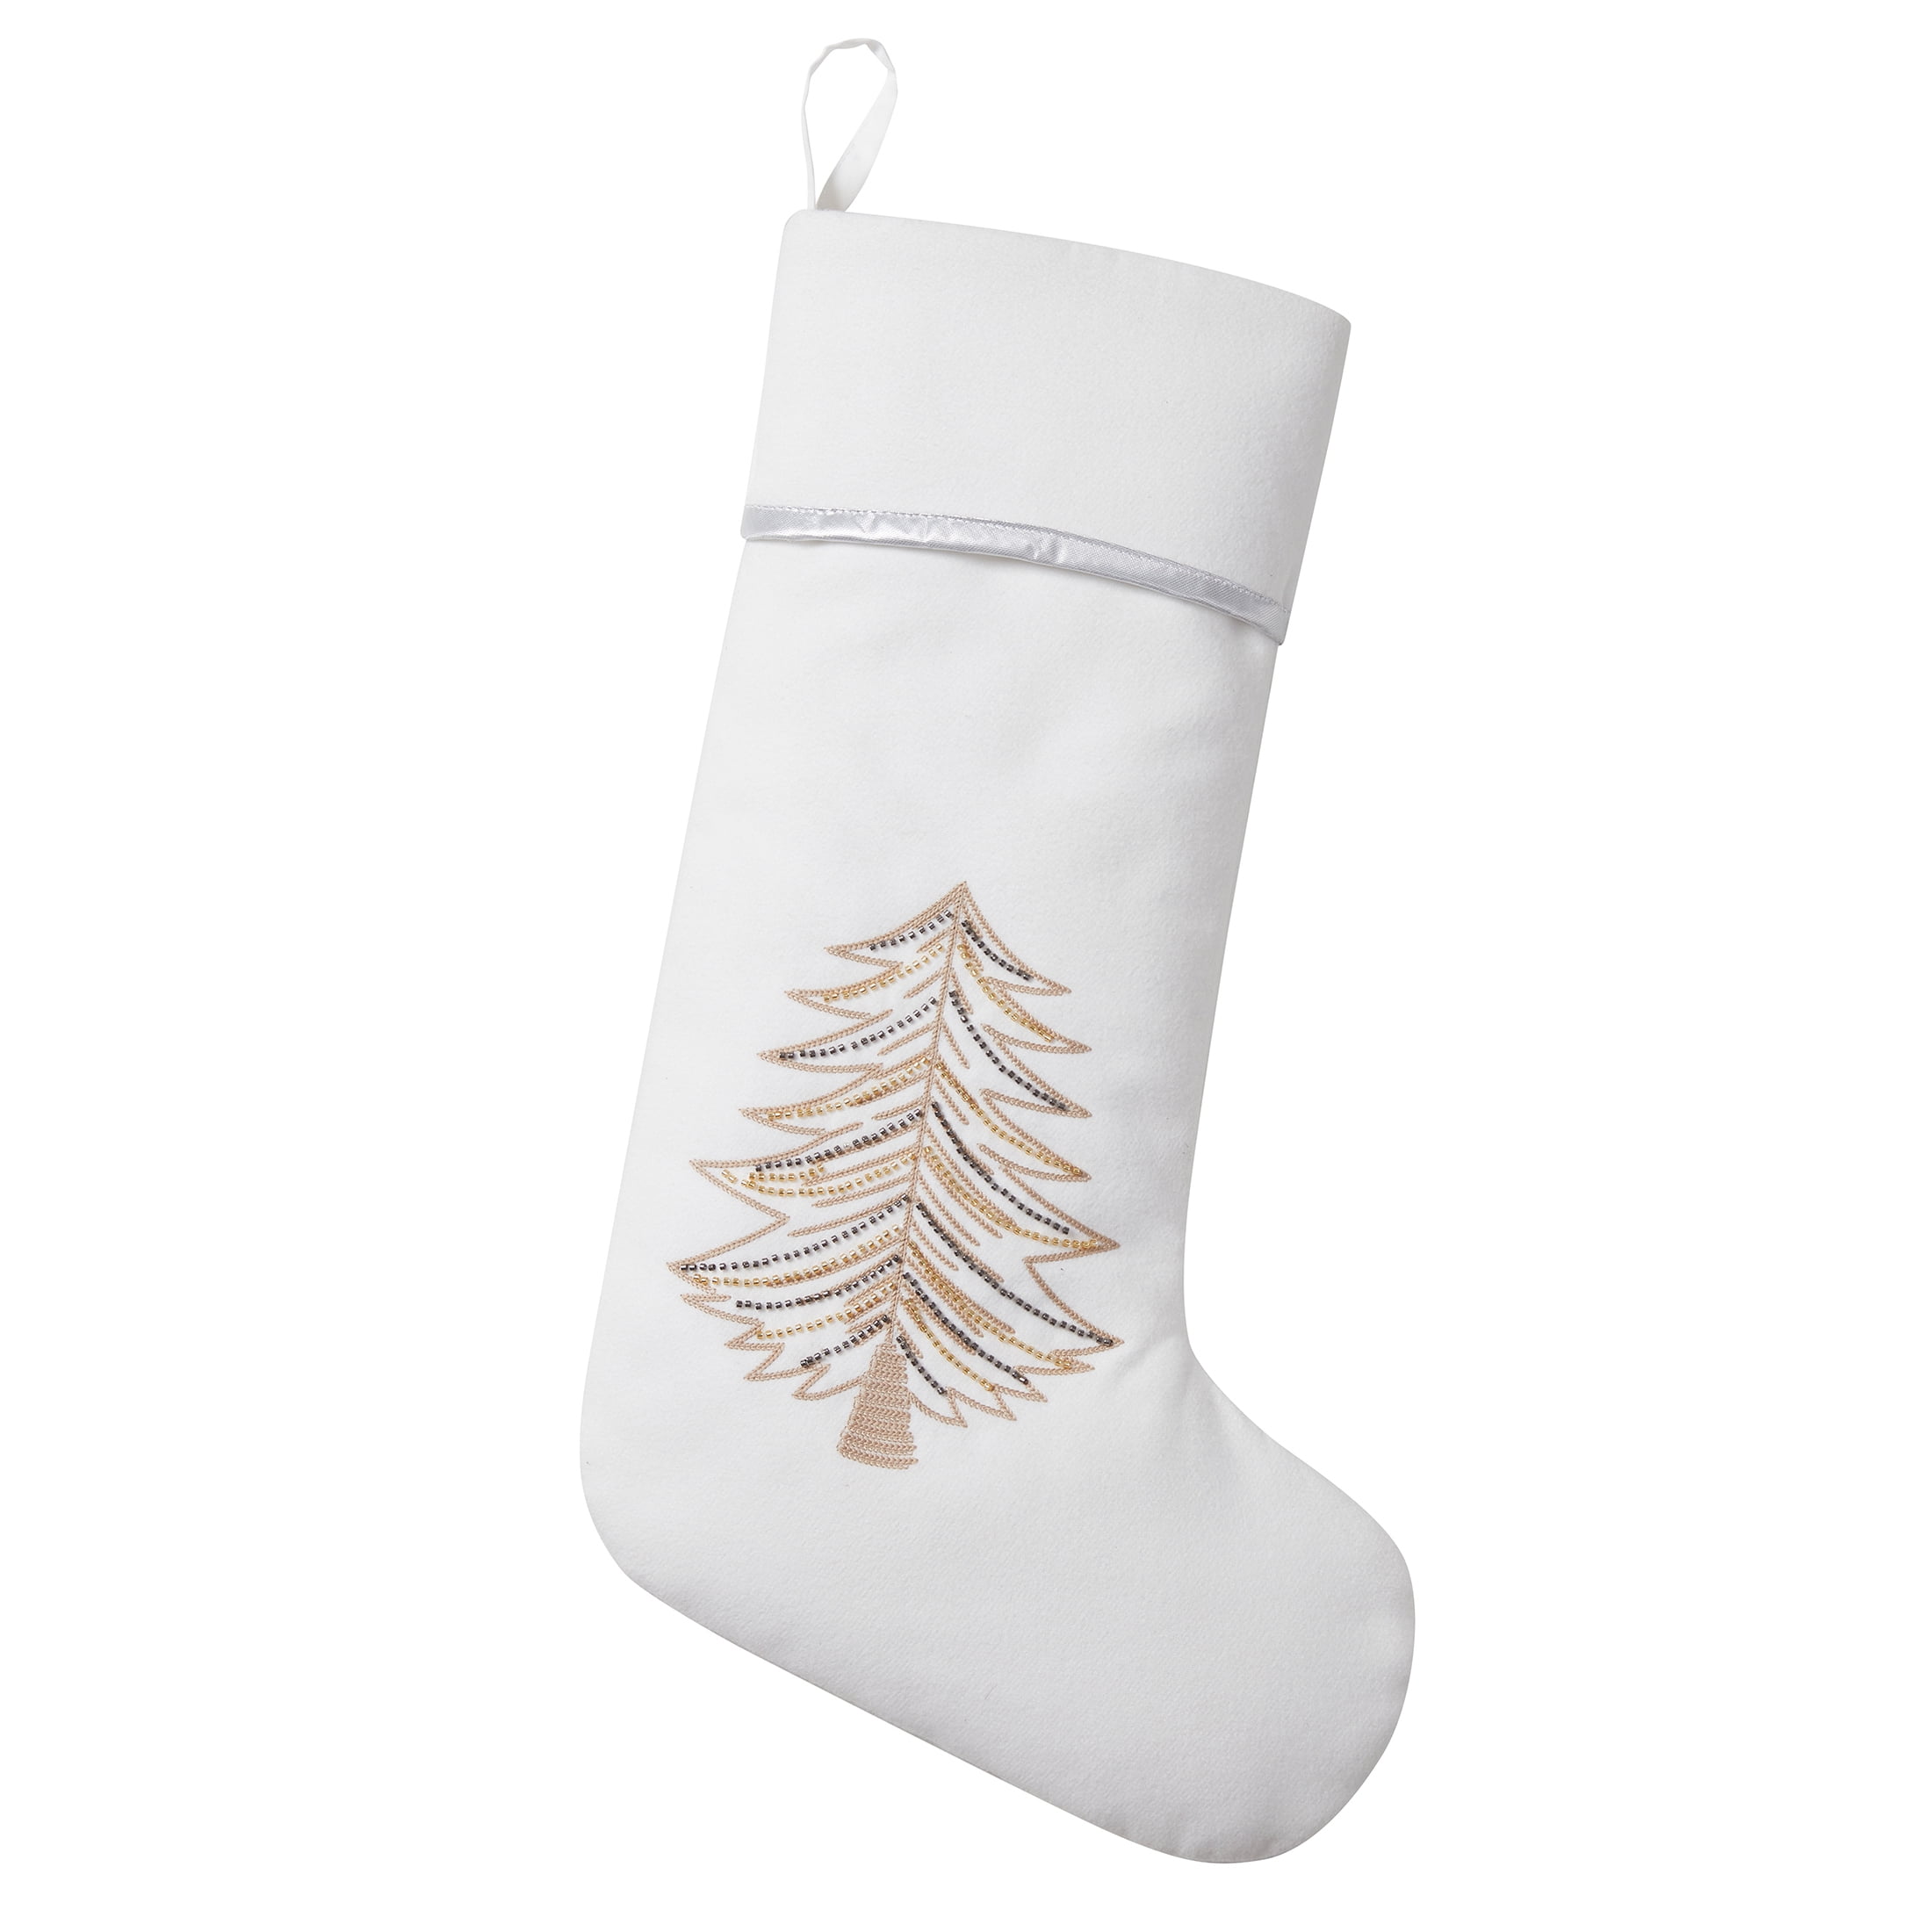 How to Decorate a Christmas Stocking – The Flour Box